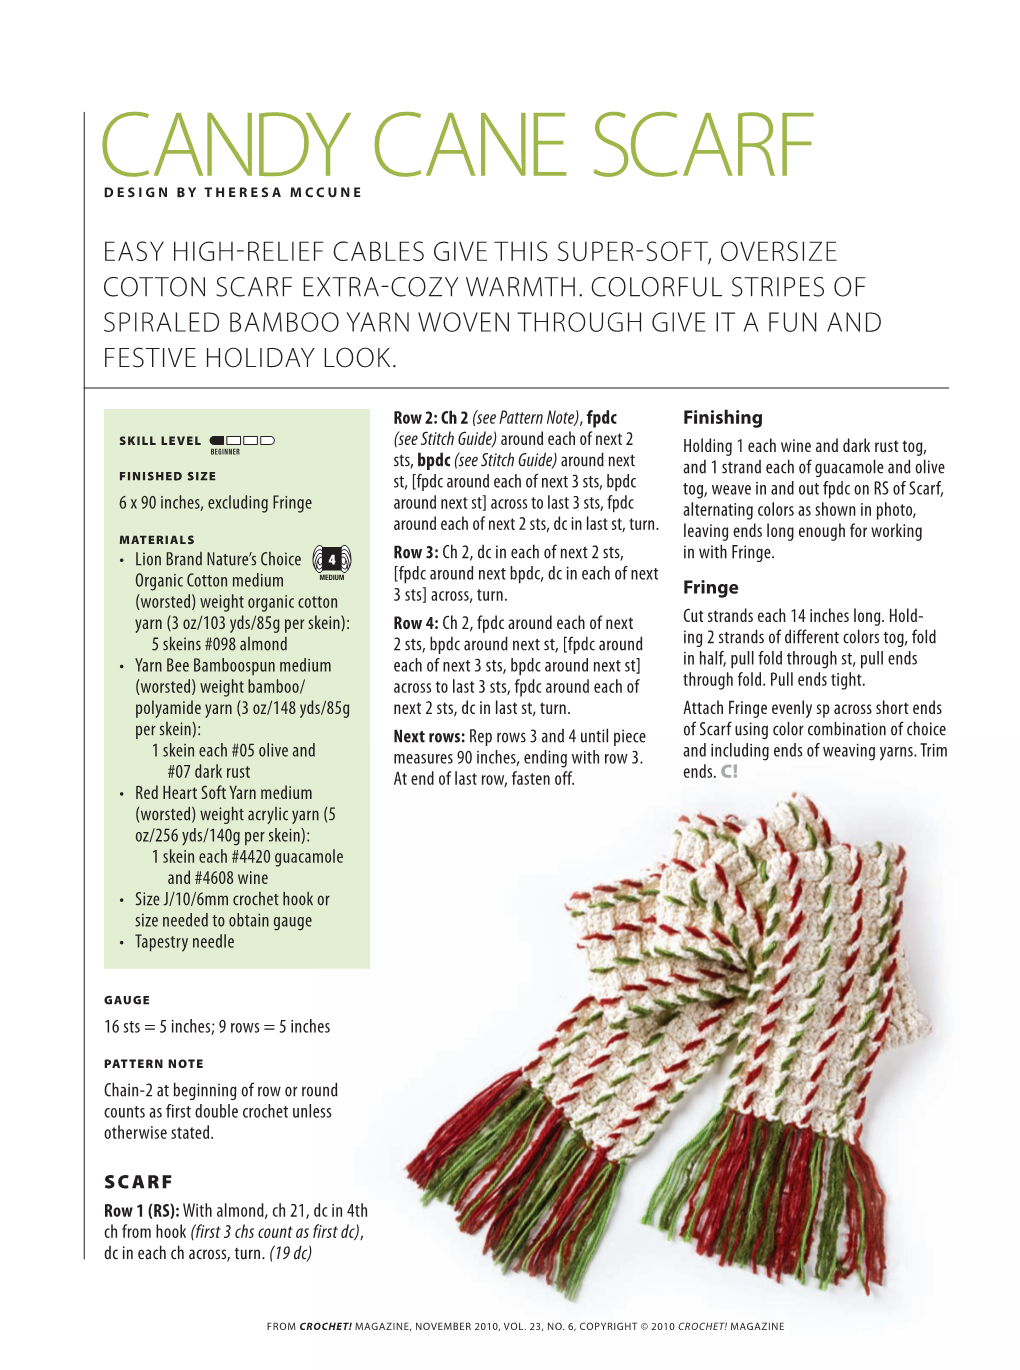 Candy Cane Scarf DESIGN by THERESA Mccune